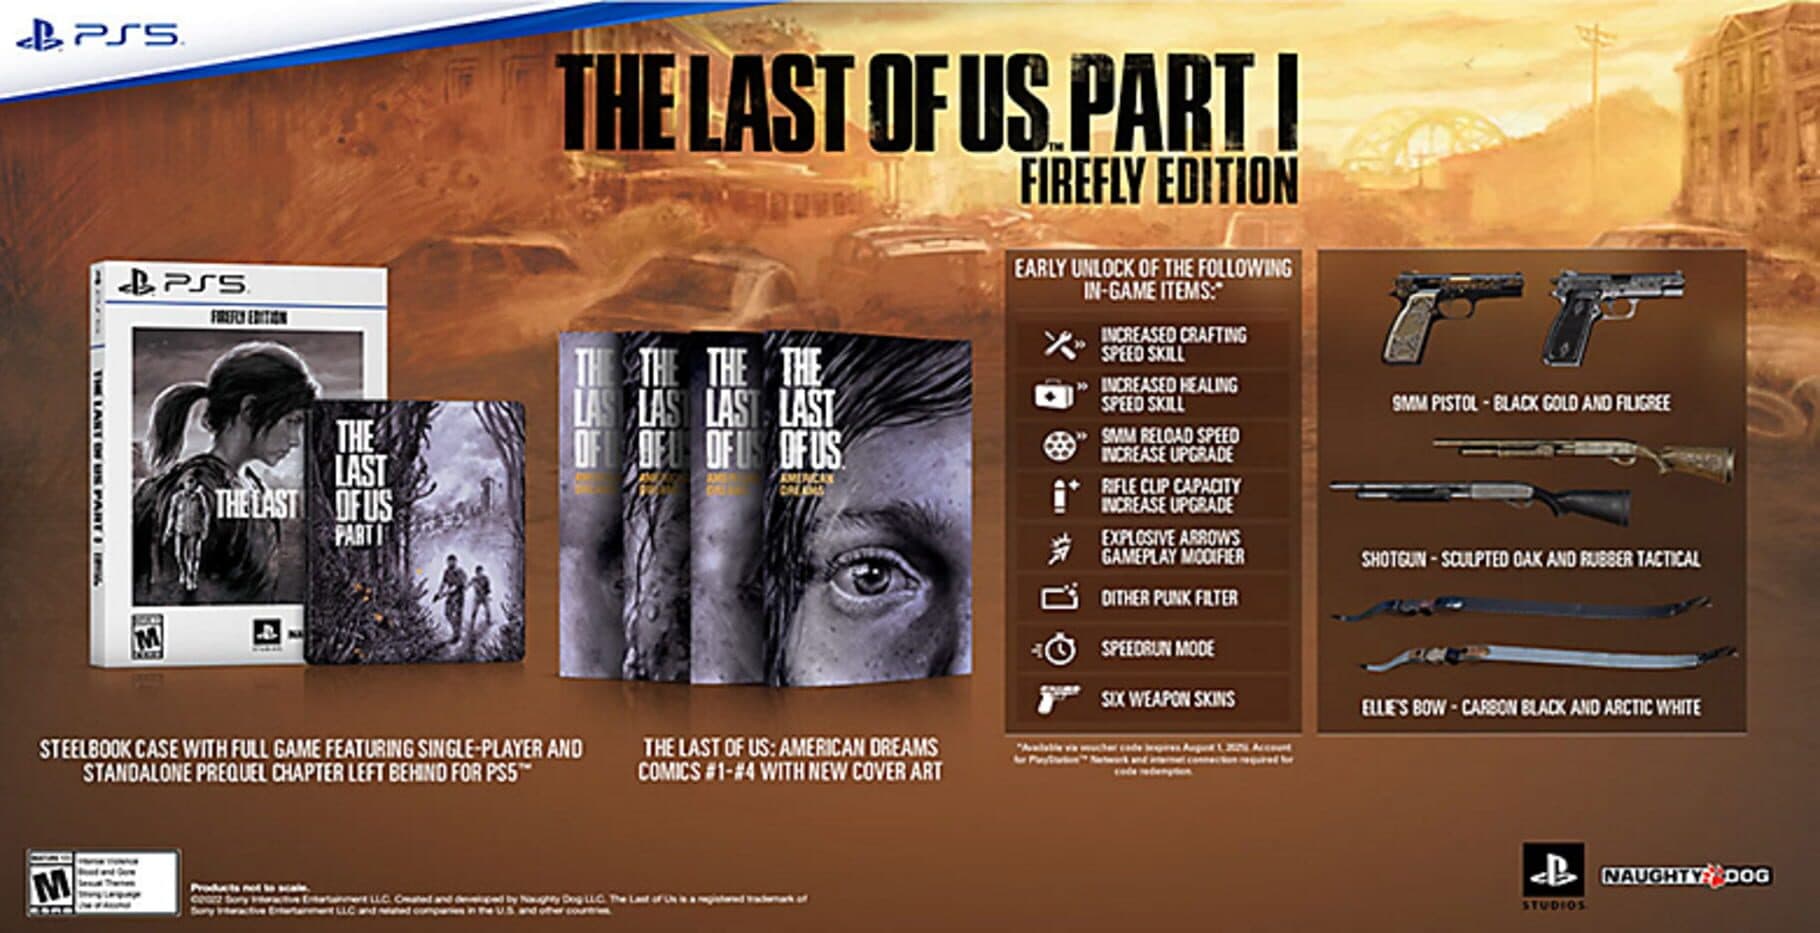 The Last of Us Part I: Firefly Edition Image